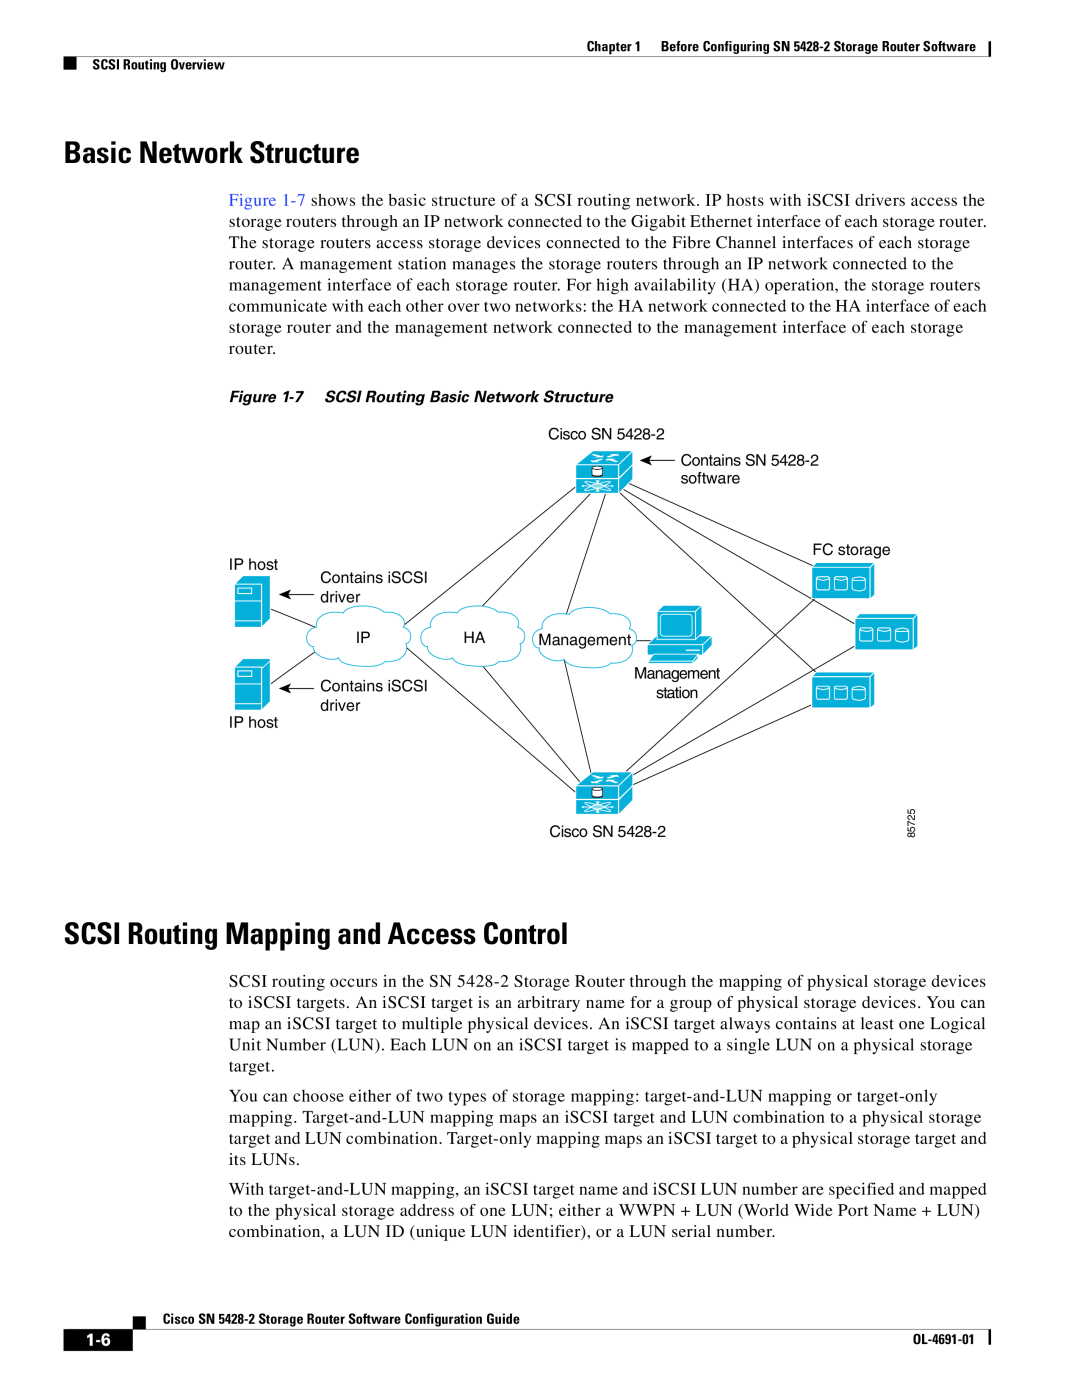 Cisco Systems SN 5428-2 manual Basic Network Structure, SCSI Routing Mapping and Access Control 